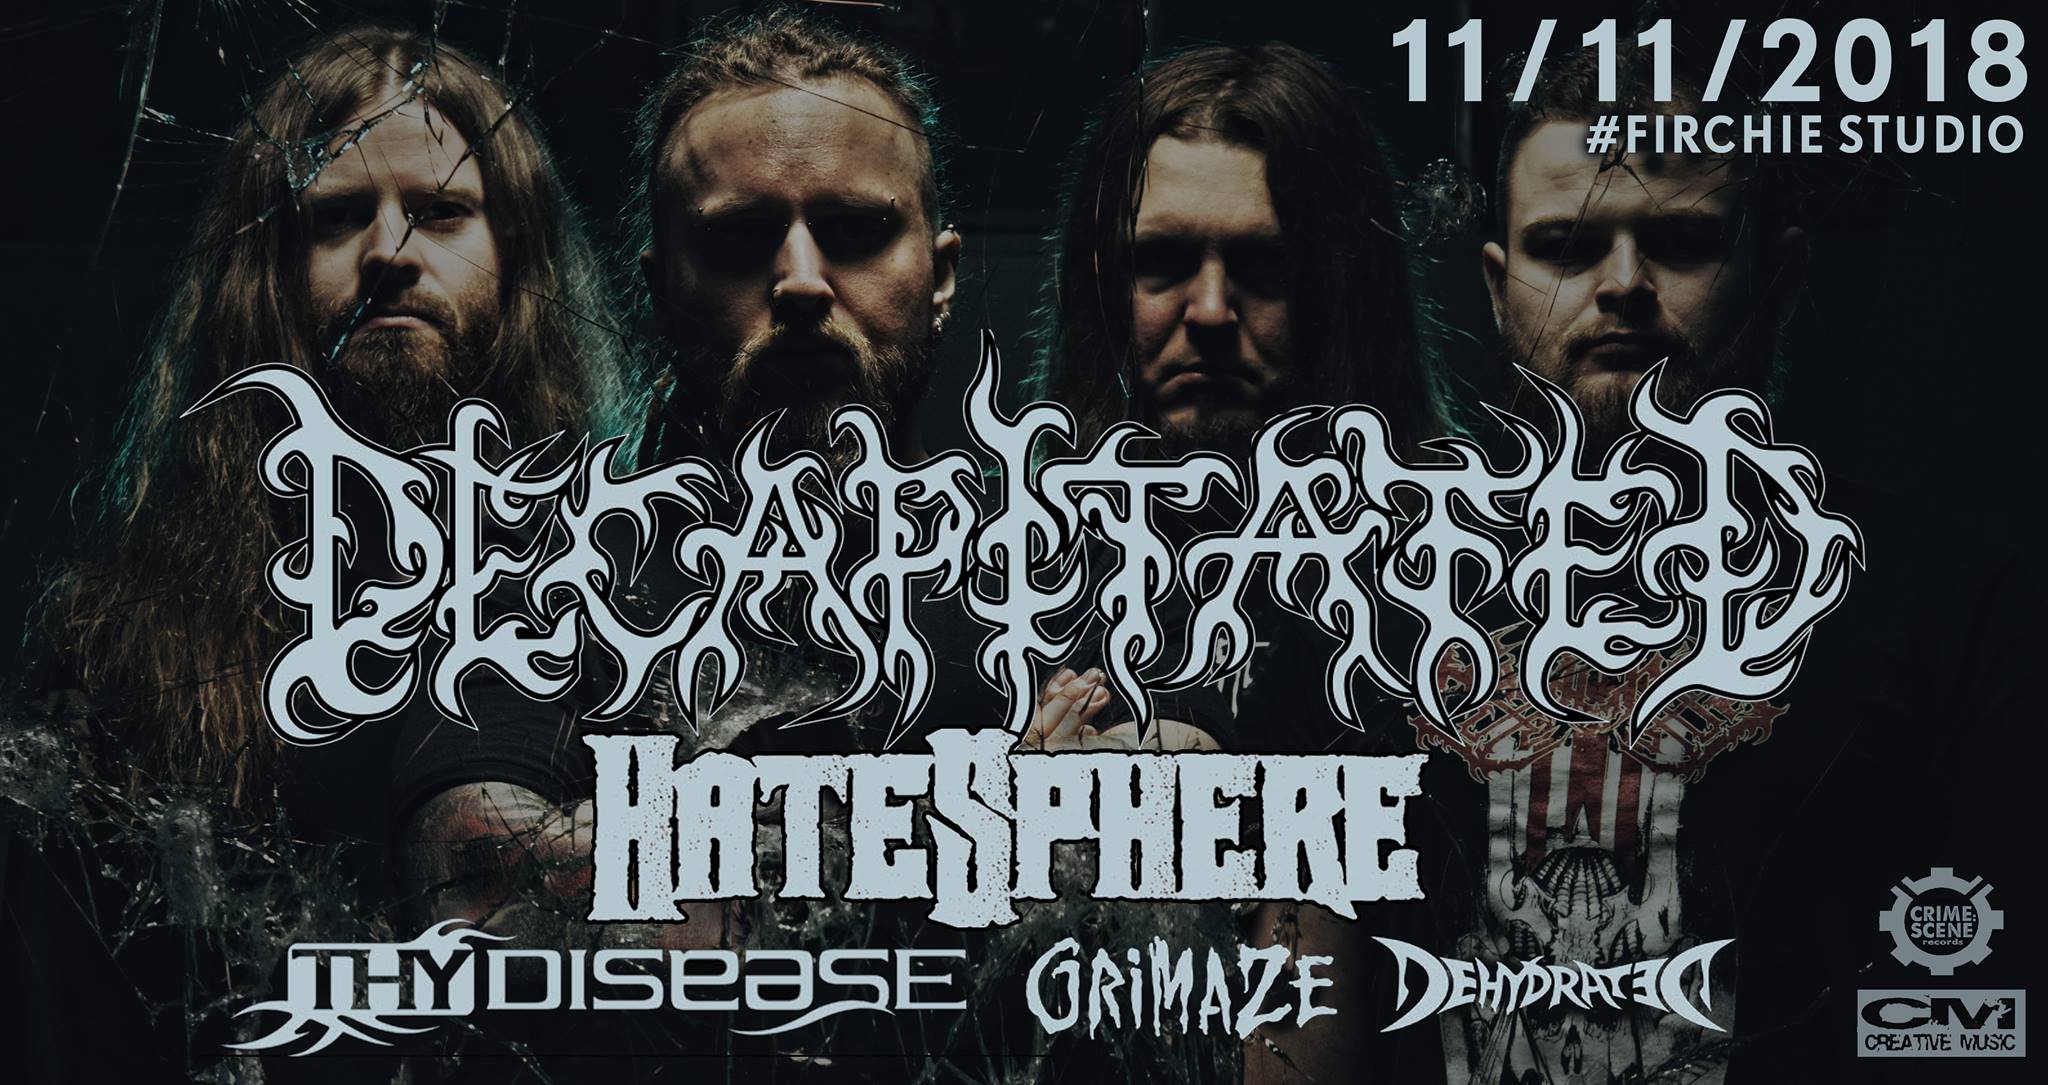 Decapitated, Hatesphere, Thy Disease + Grimaze, Dehydrated LIVE 11.11.2018.